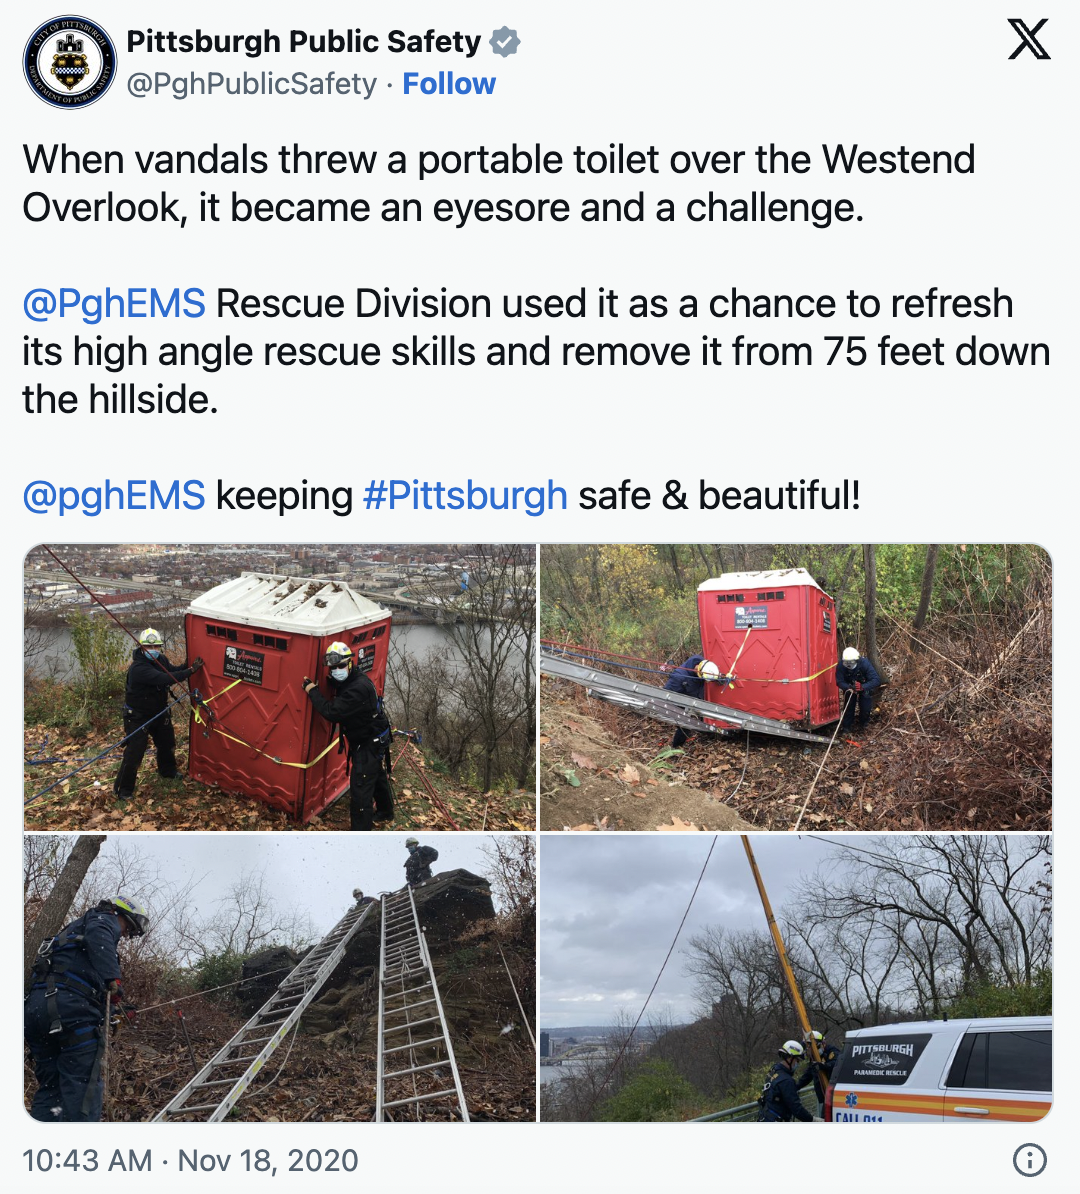 track - Pittsburgh Public Safety When vandals threw a portable toilet over the Westend Overlook, it became an eyesore and a challenge. X Rescue Division used it as a chance to refresh its high angle rescue skills and remove it from 75 feet down the hillsi